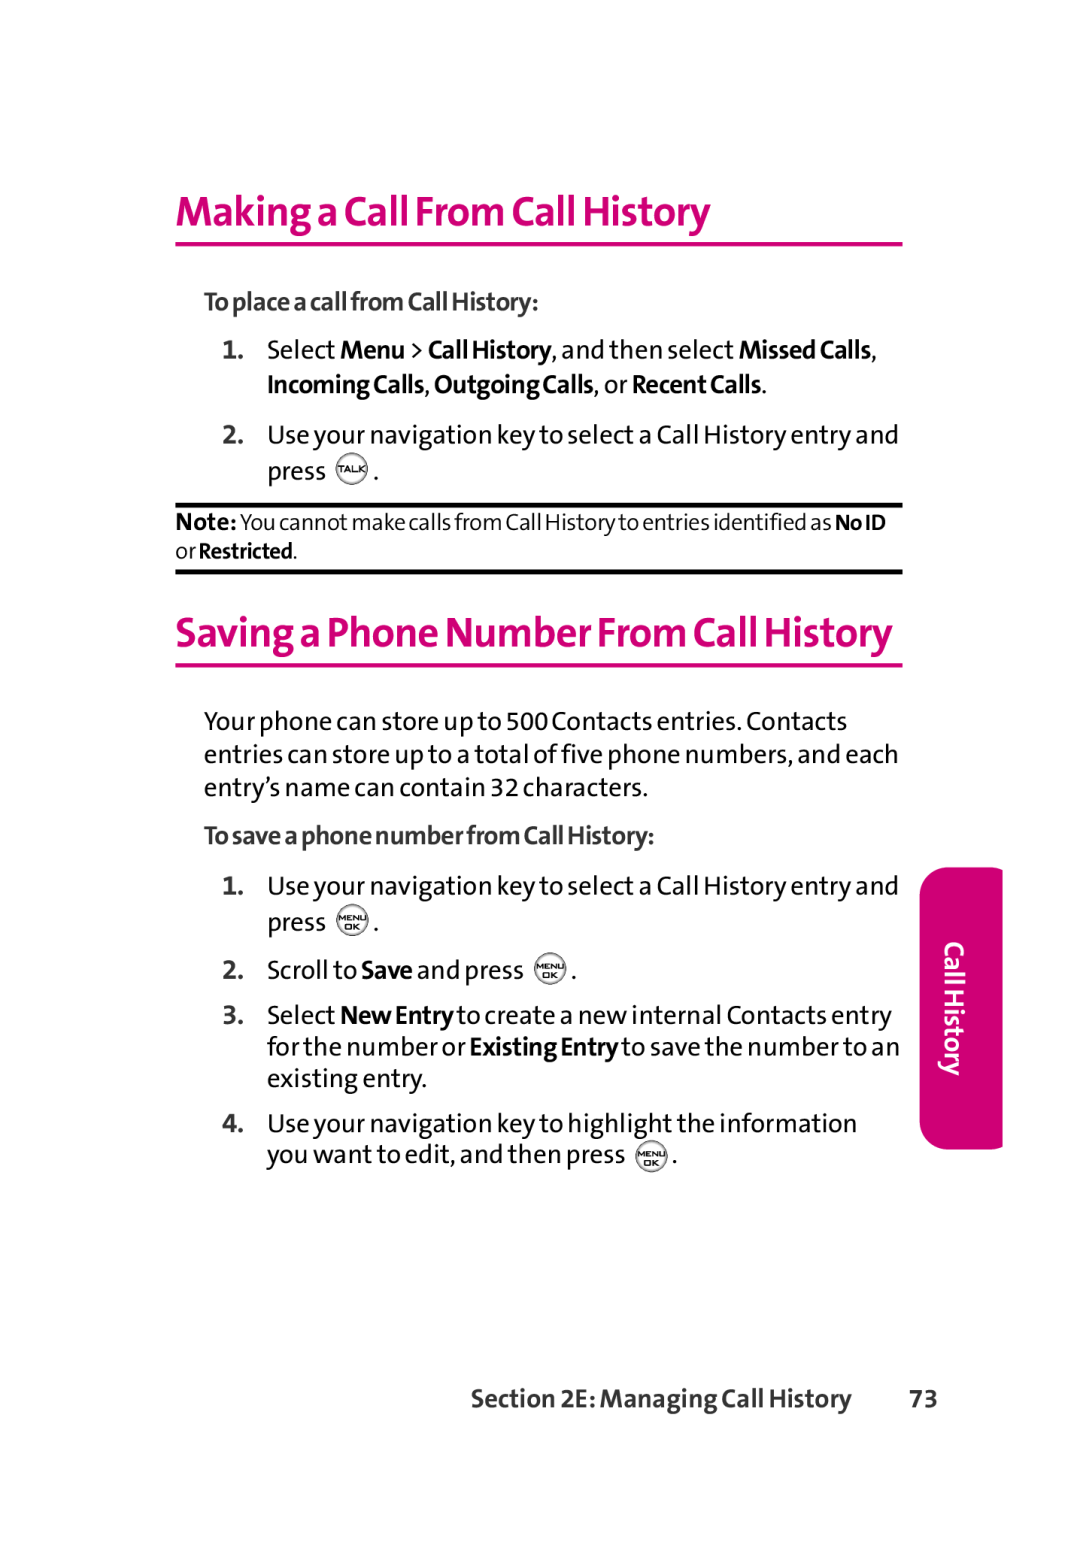 LG Electronics 350 Making a Call FromCall History, Saving a Phone Number FromCall History, ToplaceacallfromCallHistory 